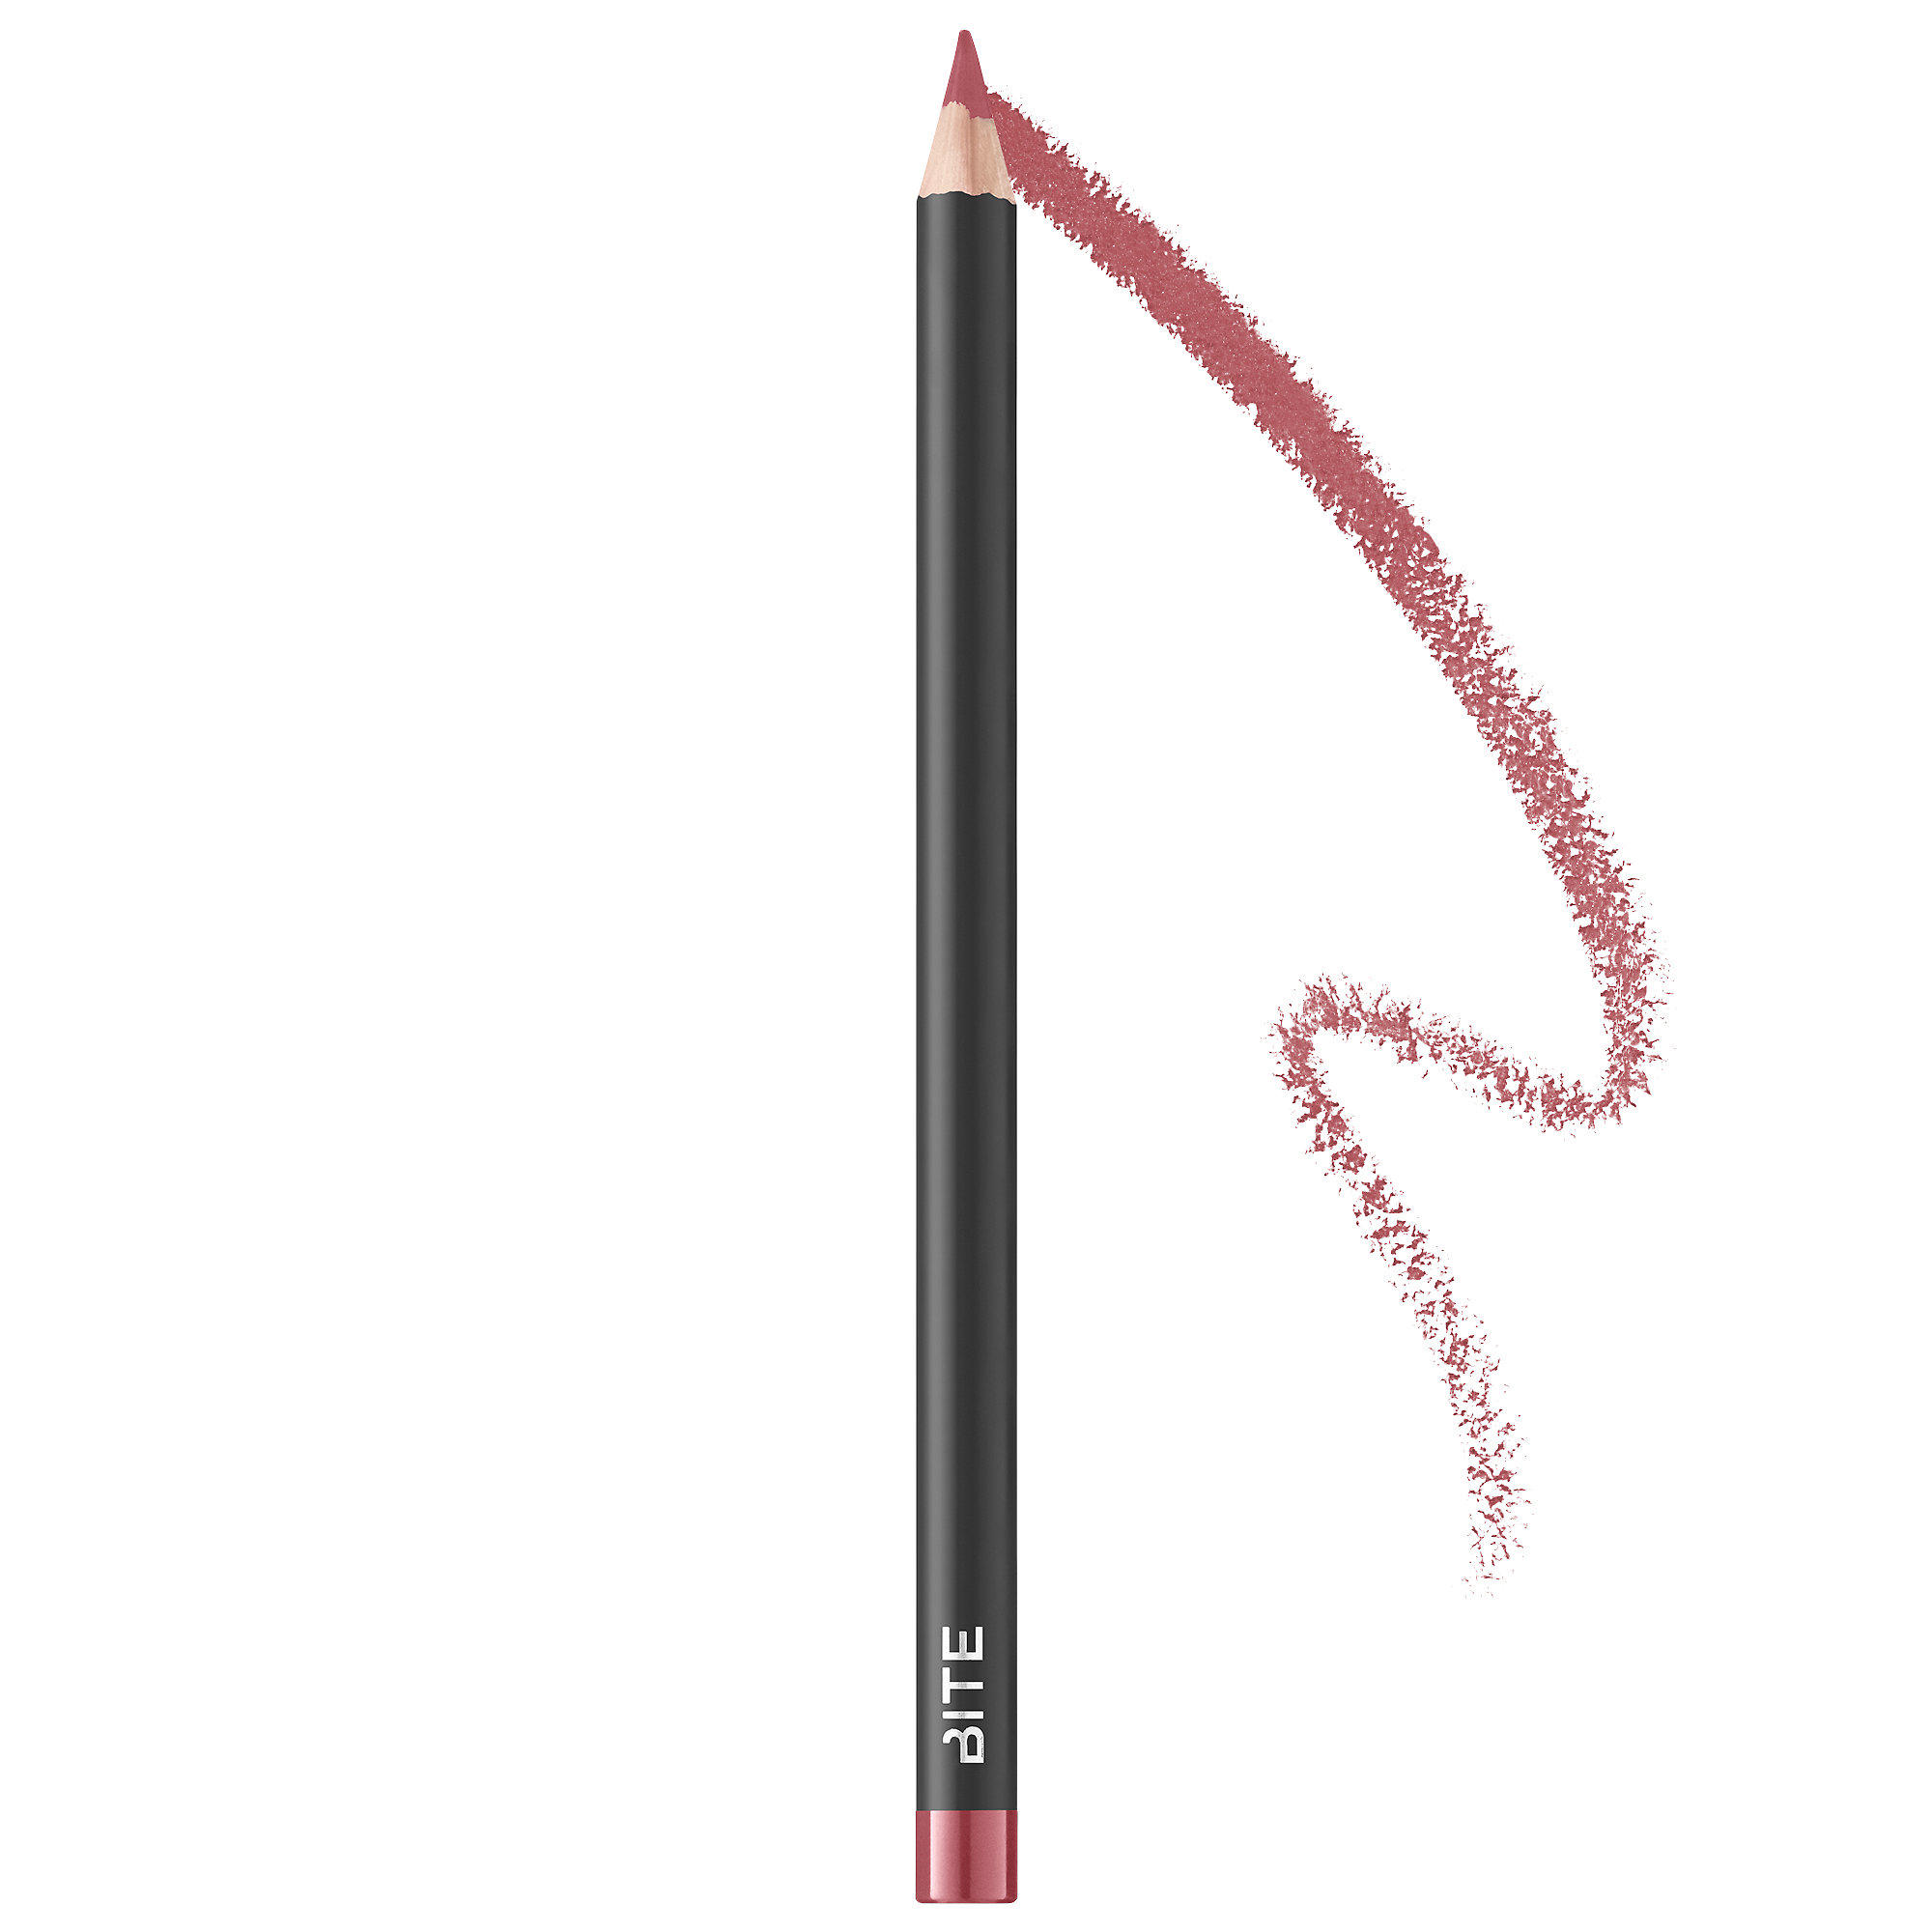 Bite Beauty The Lip Pencil Rosey Pink 004